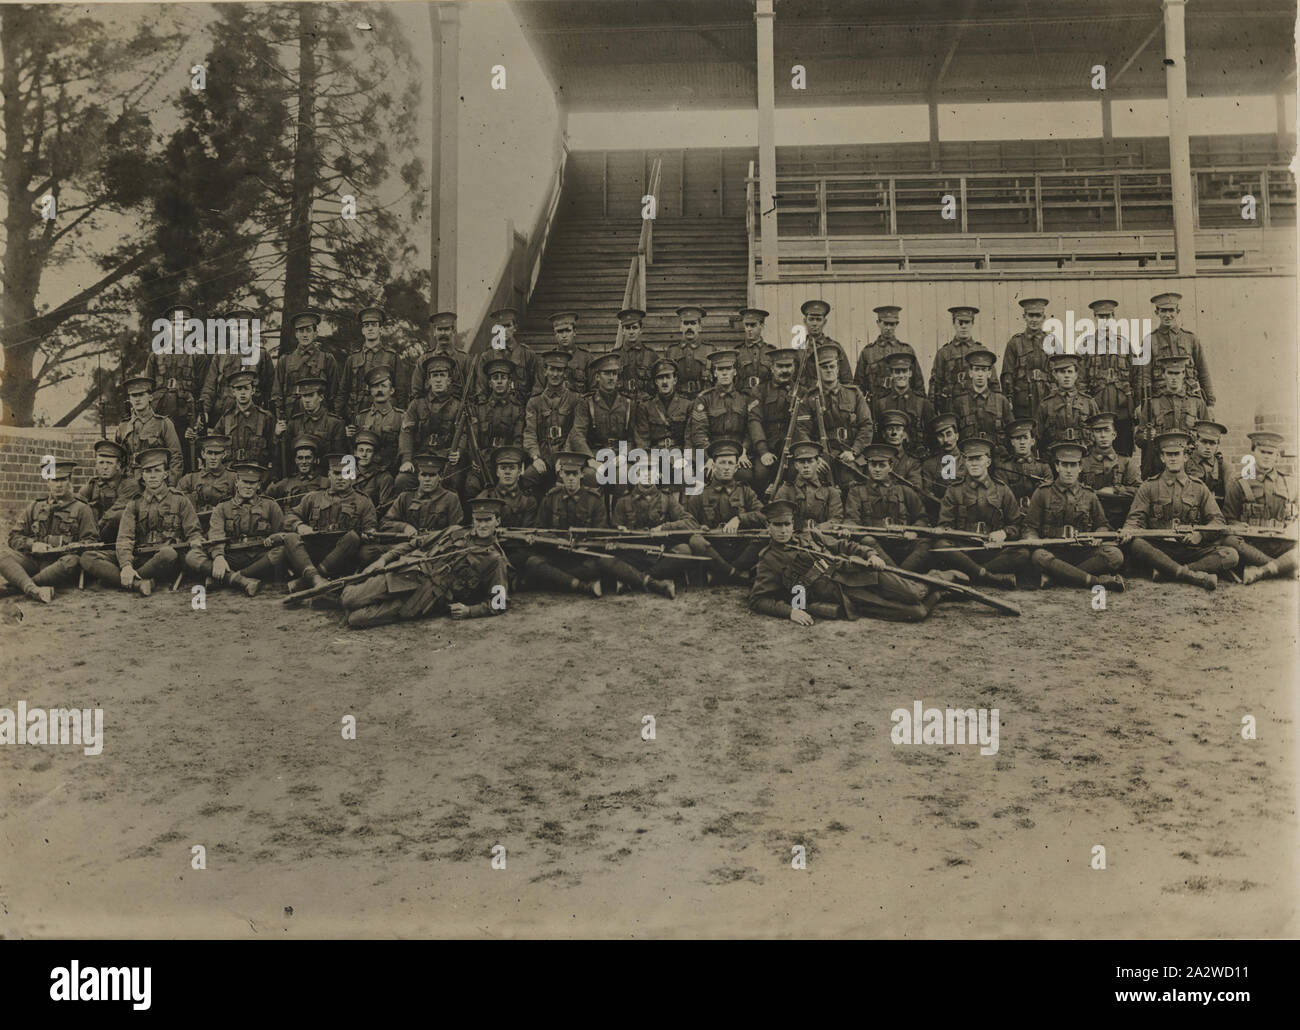 Photograph - 39th Infantry Battalion, Ballarat Showgrounds, 1915, 39th Infantry Battalion, AIF, photographed at the Ballarat Showgrounds in 1915. The group includes service Private R.G. Holland, service # 911, the donor's father Stock Photo